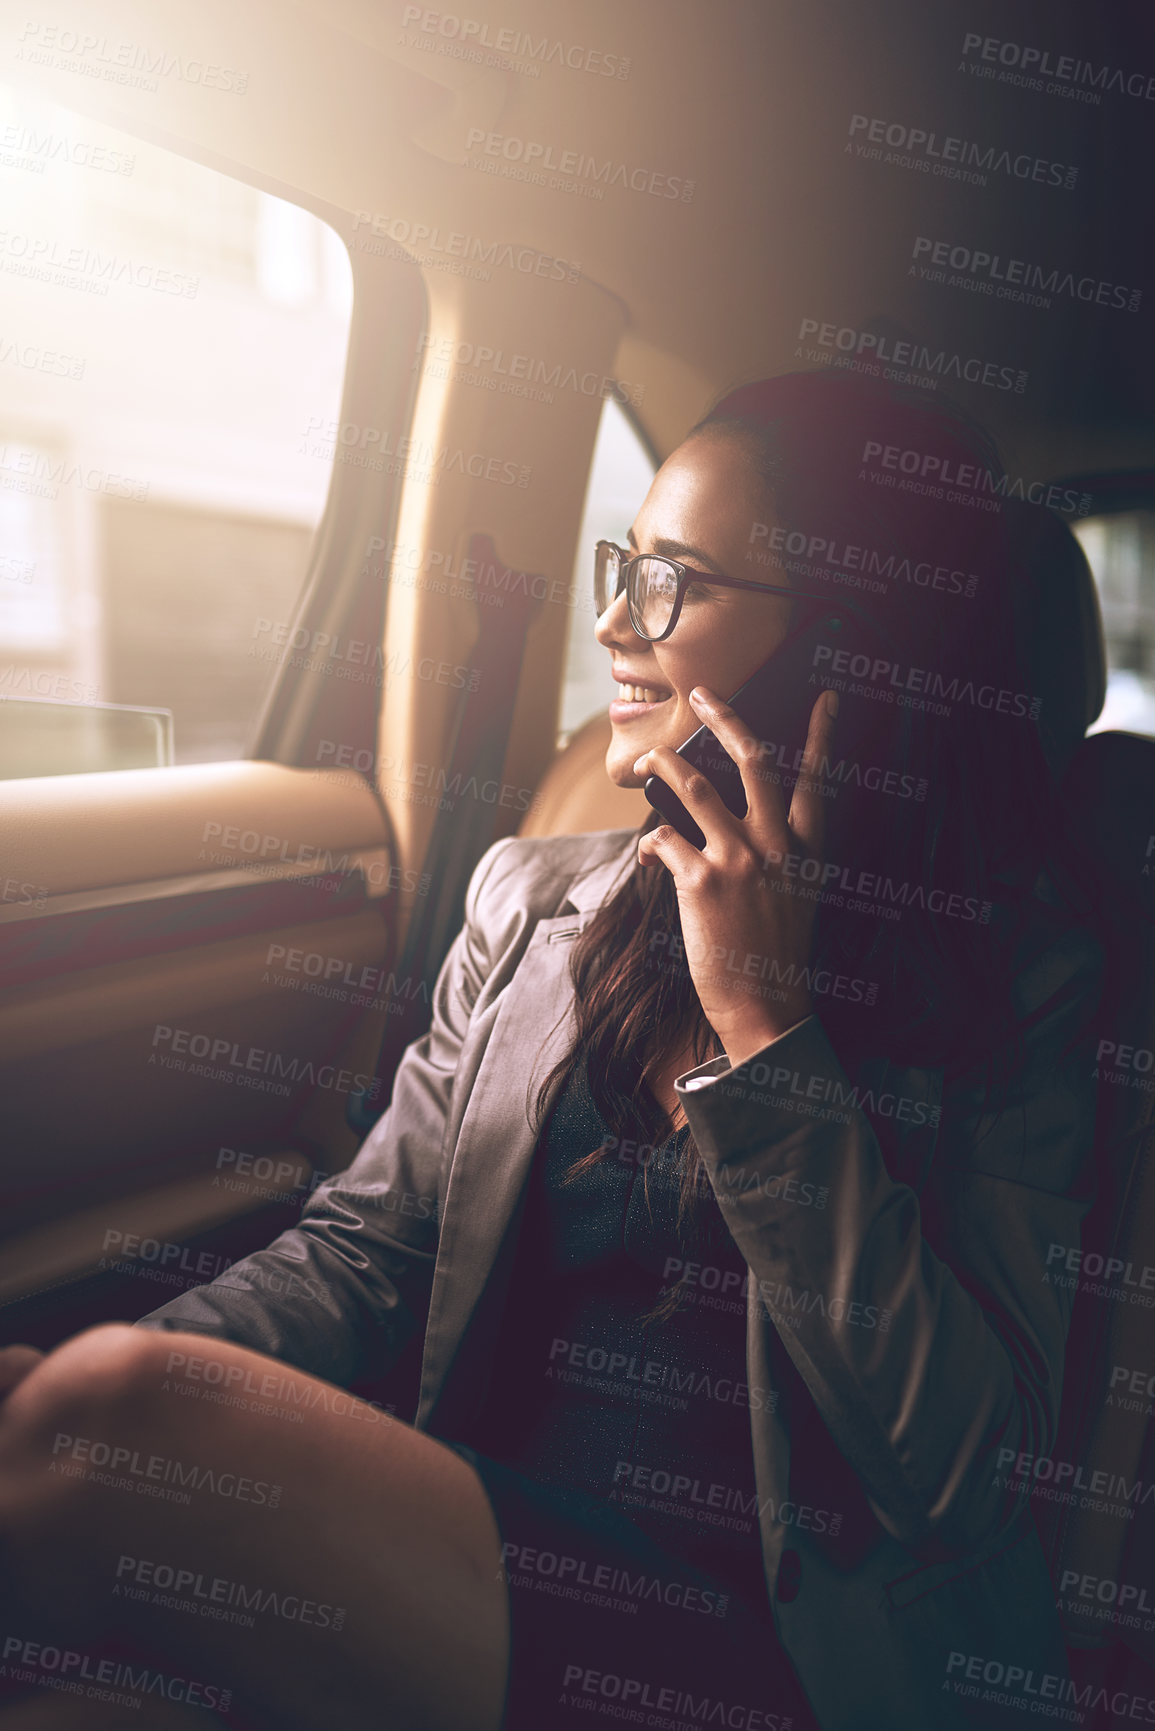 Buy stock photo Shot of a young businesswoman talking on a cellphone in the backseat of a car